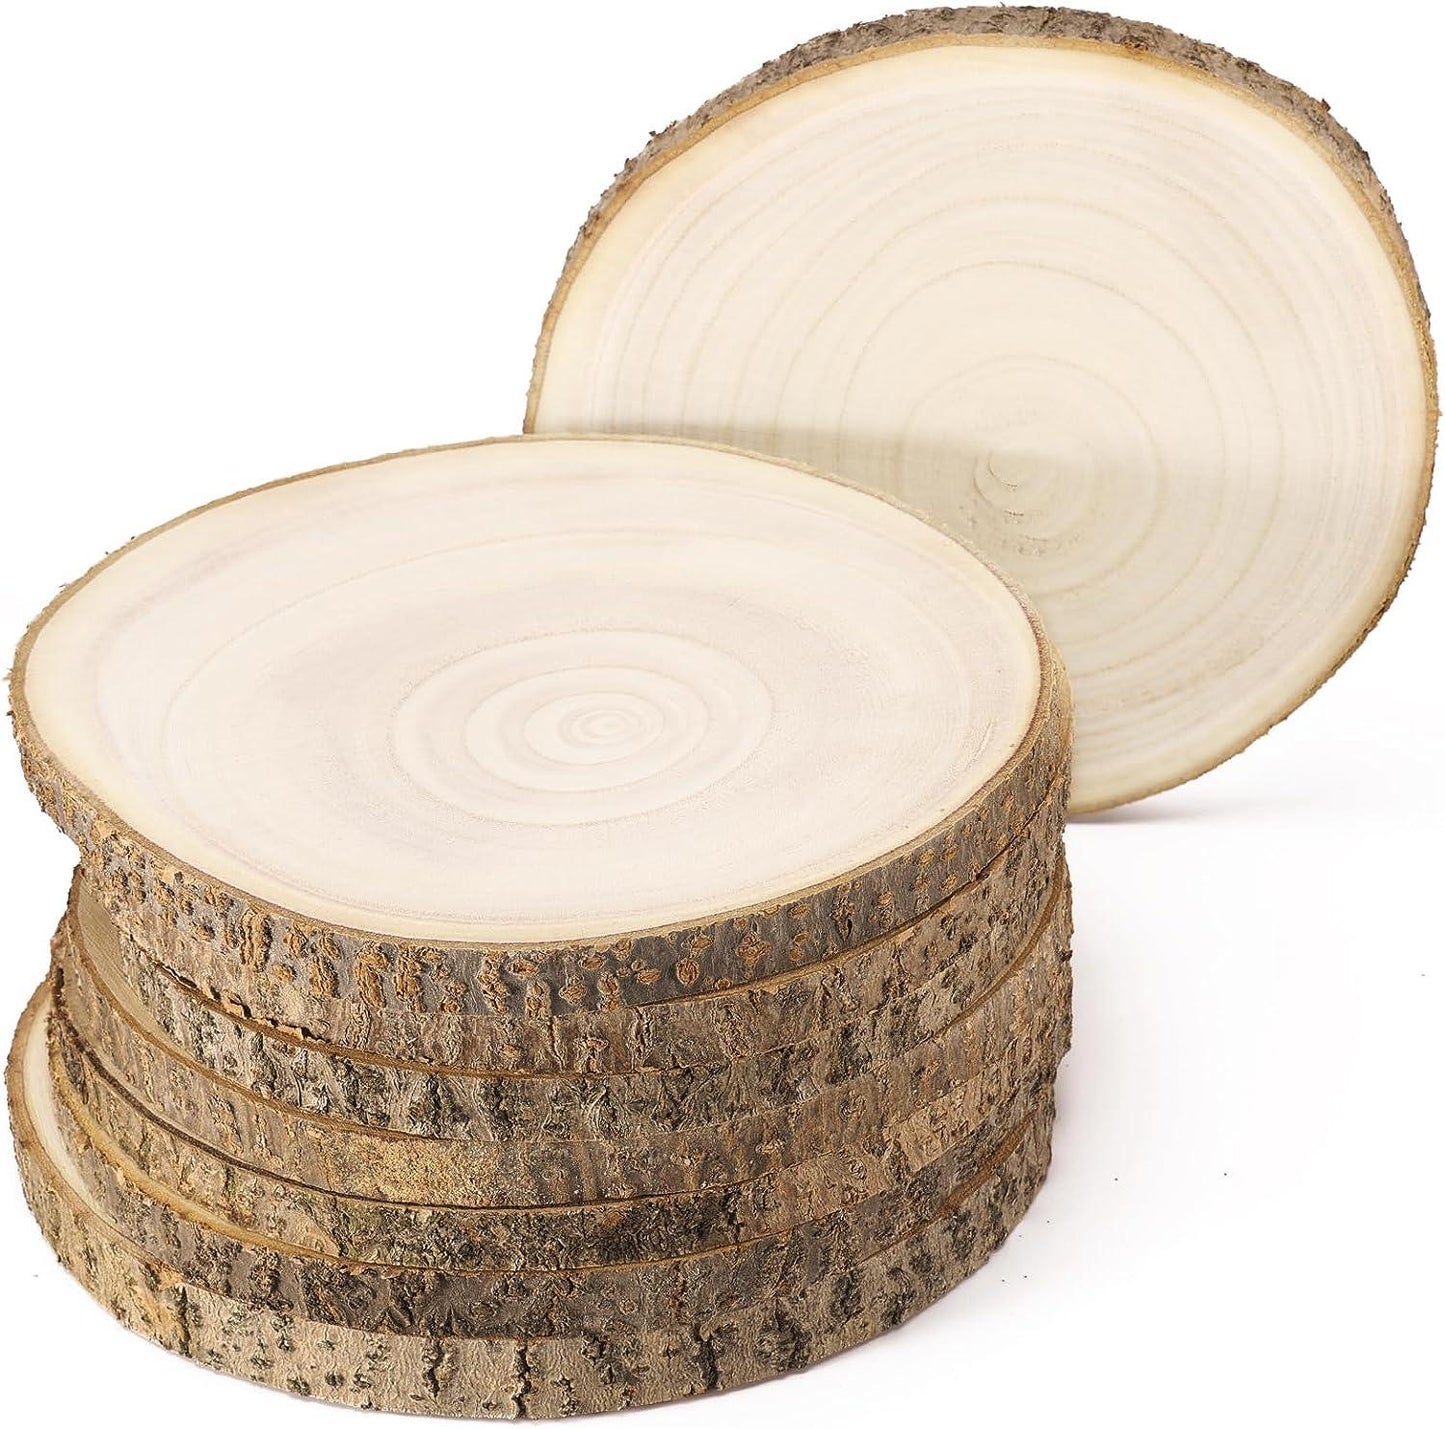 10pcs 6-7 Inch Nature Wood Slice for Weddings, Wood Slice Centerpieces, Rustic Wedding Decorations